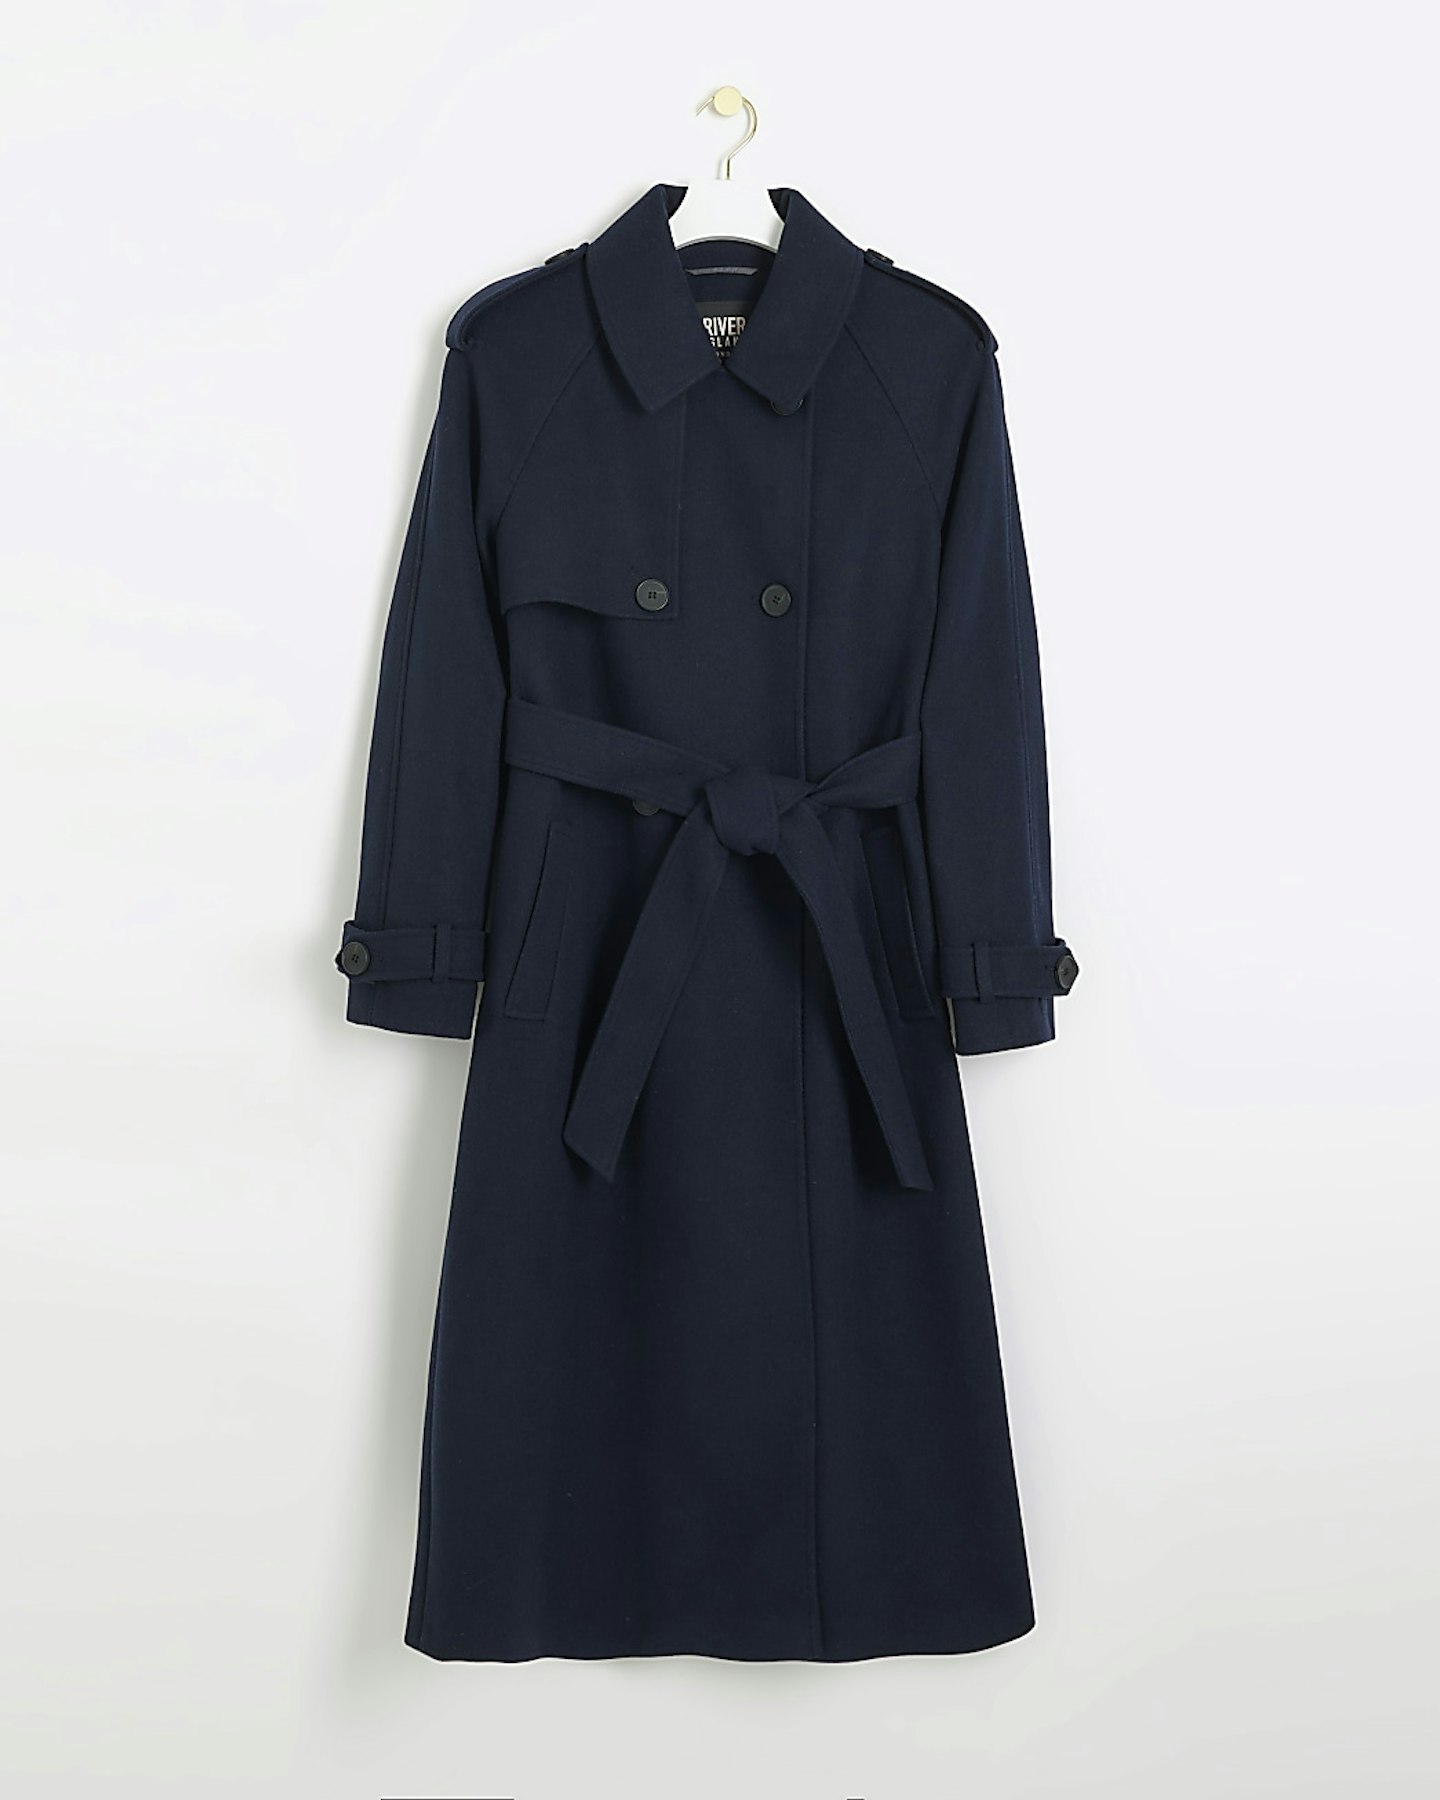 River Island, Navy Belted Longline Trench Coat